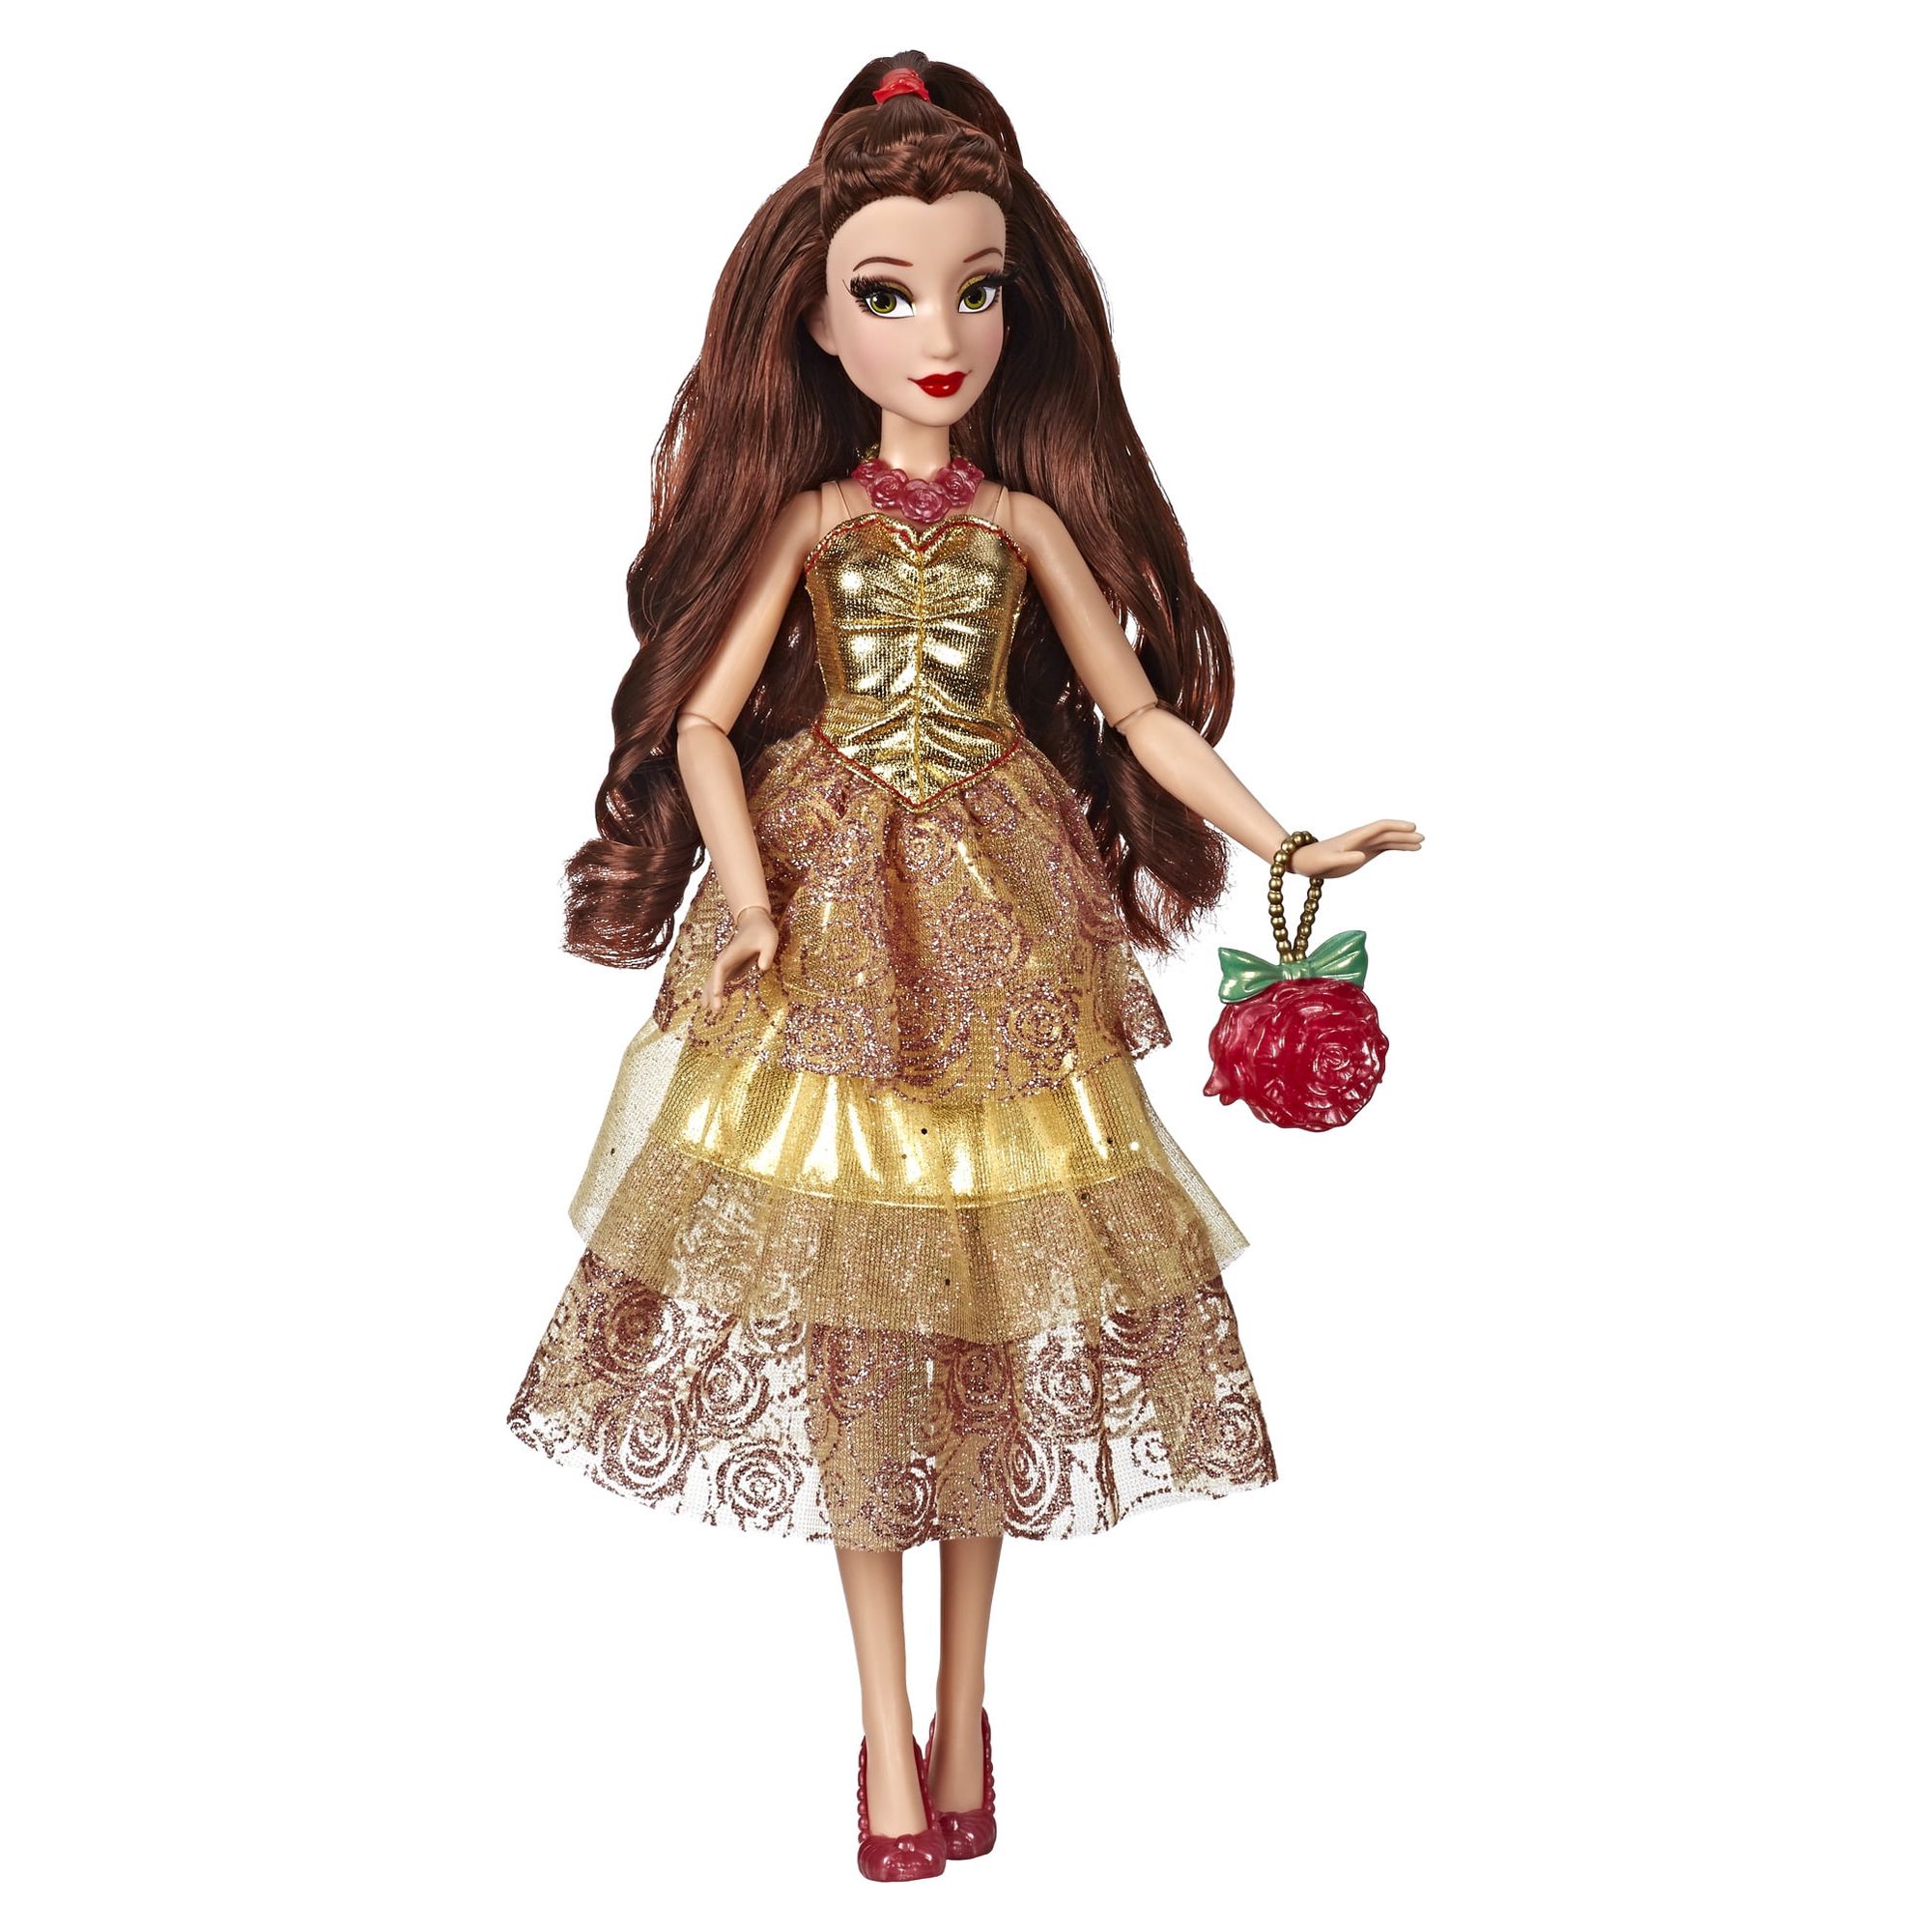 Disney Princess Style Series, Belle Fashion Doll In Contemporary Style - image 1 of 9